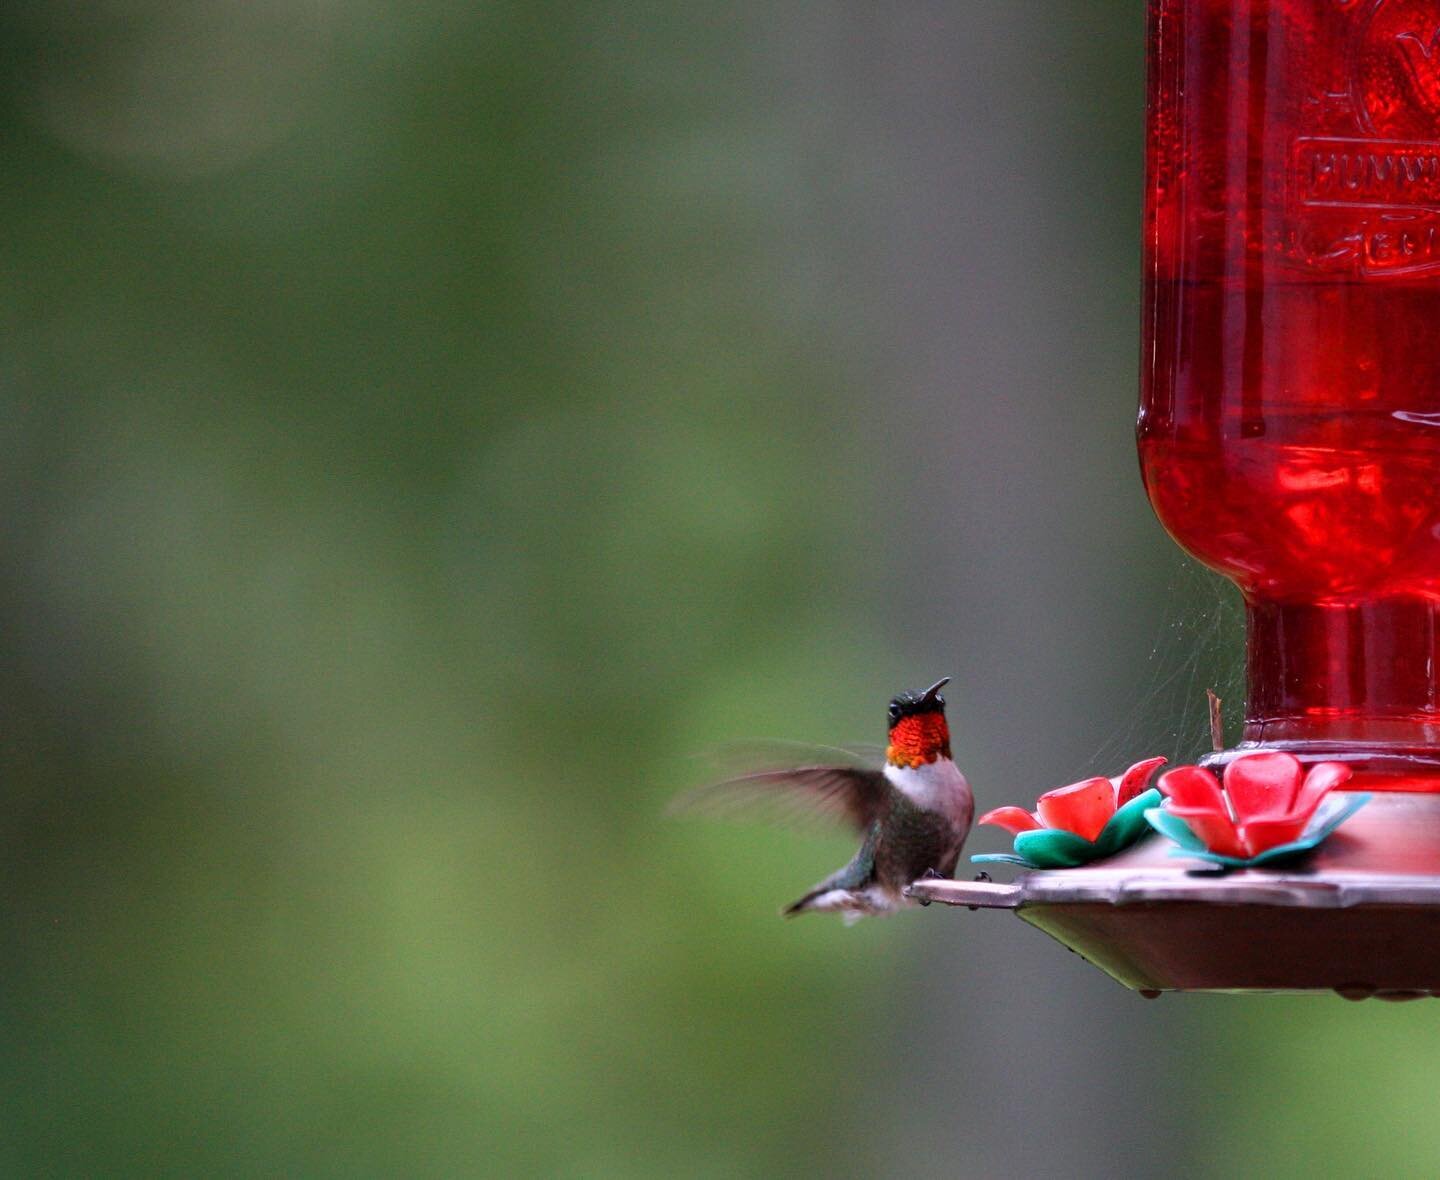 Hummingbirds on a hot day 🌞 Make sure your sugar water doesn&rsquo;t go bad in the heat! #photography #birdwatching #hummingbirds #nature #travel #travelphotography #naturephotography